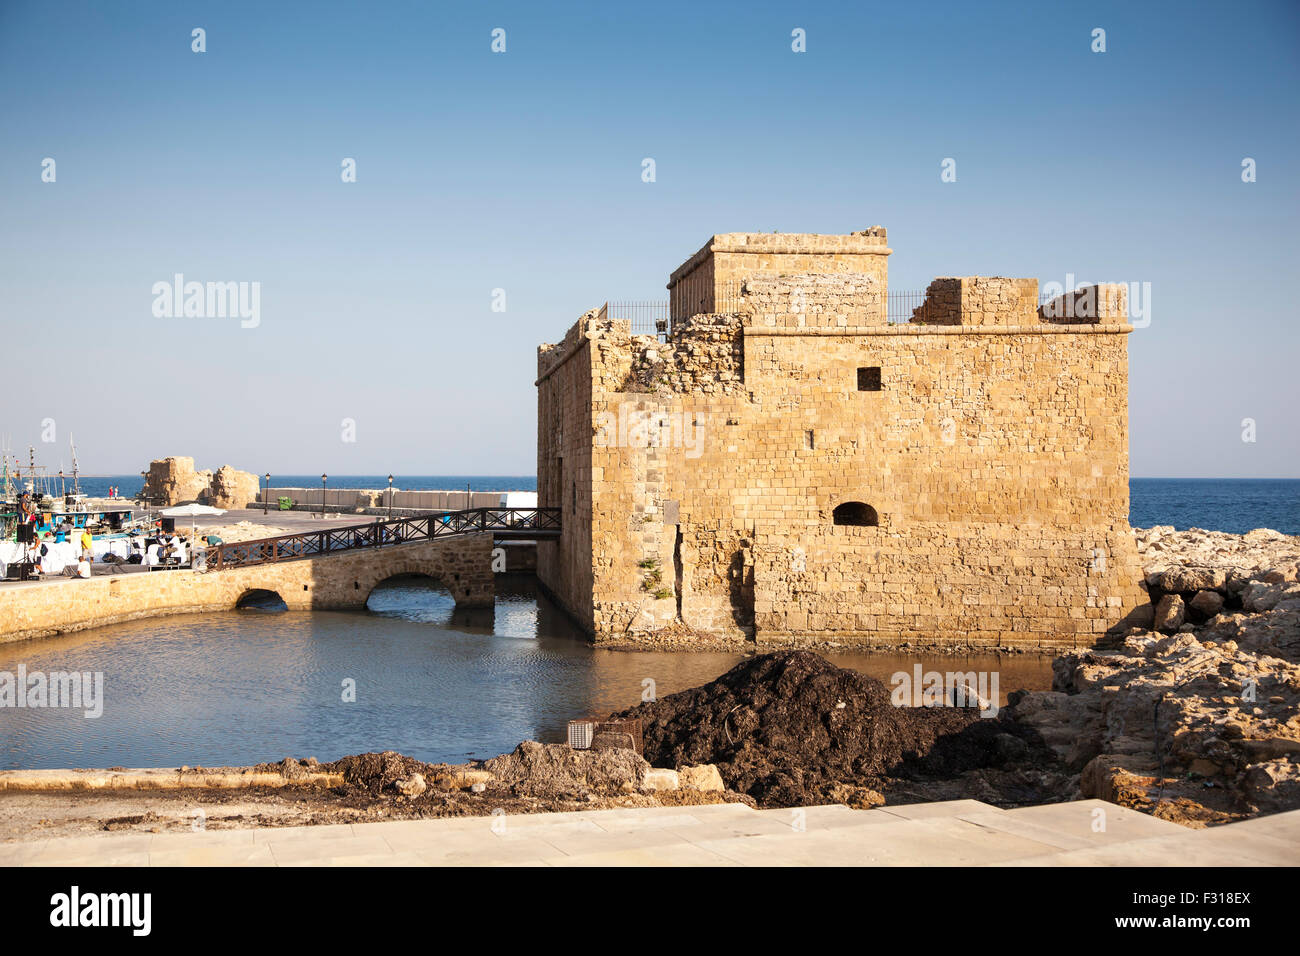 Paphos City, Cyprus - JULY 16, 2015: Paphos medieval fort in the afternoon Stock Photo